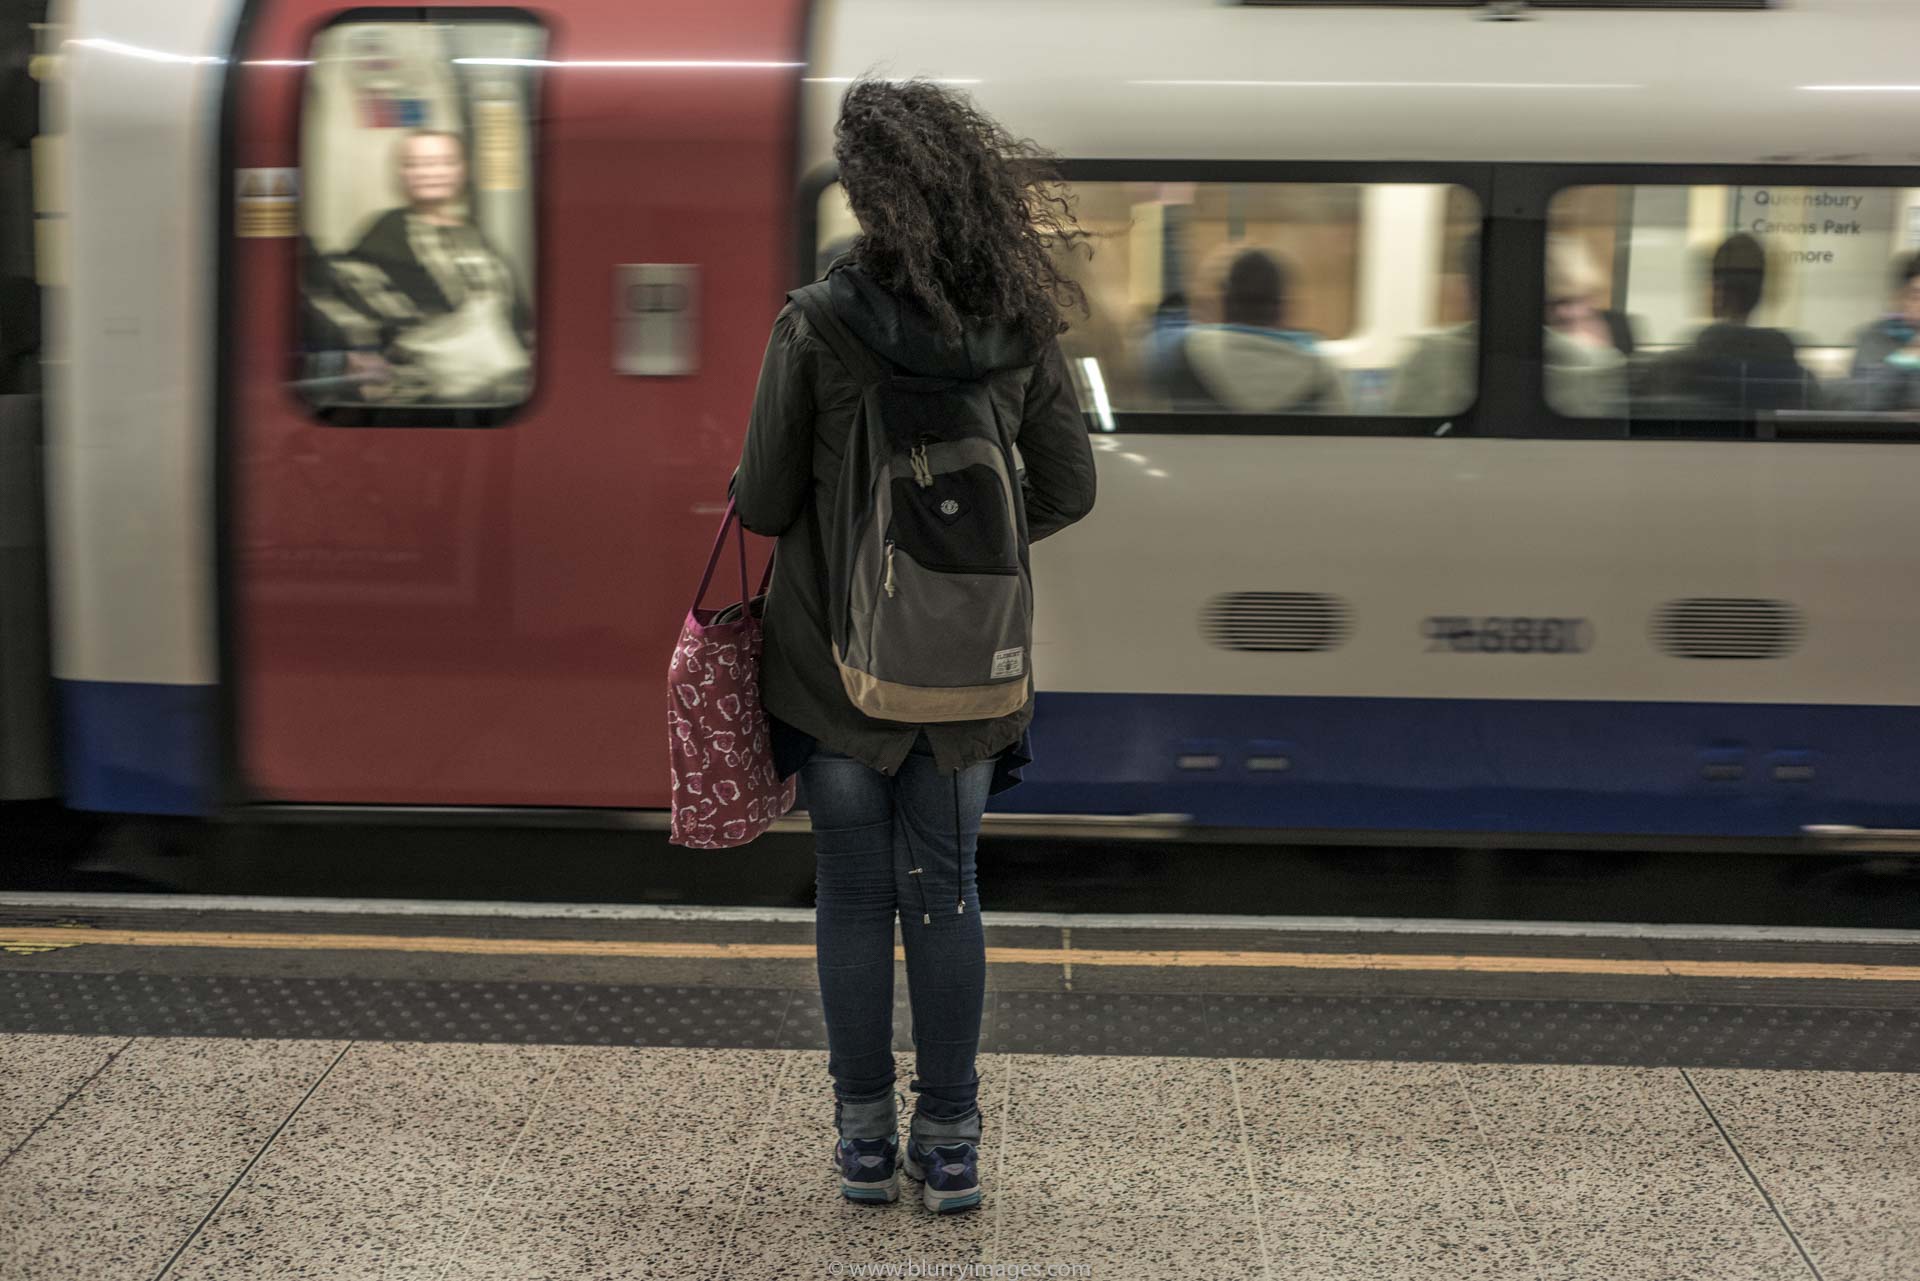 London tube, tube station, metro station, waiting for a train, red bag, blue jeans, trousers, coach, windows, blurry pictures, grey coat, grey jacket, black hair, dark hair, woman's hair, 2016, backpack